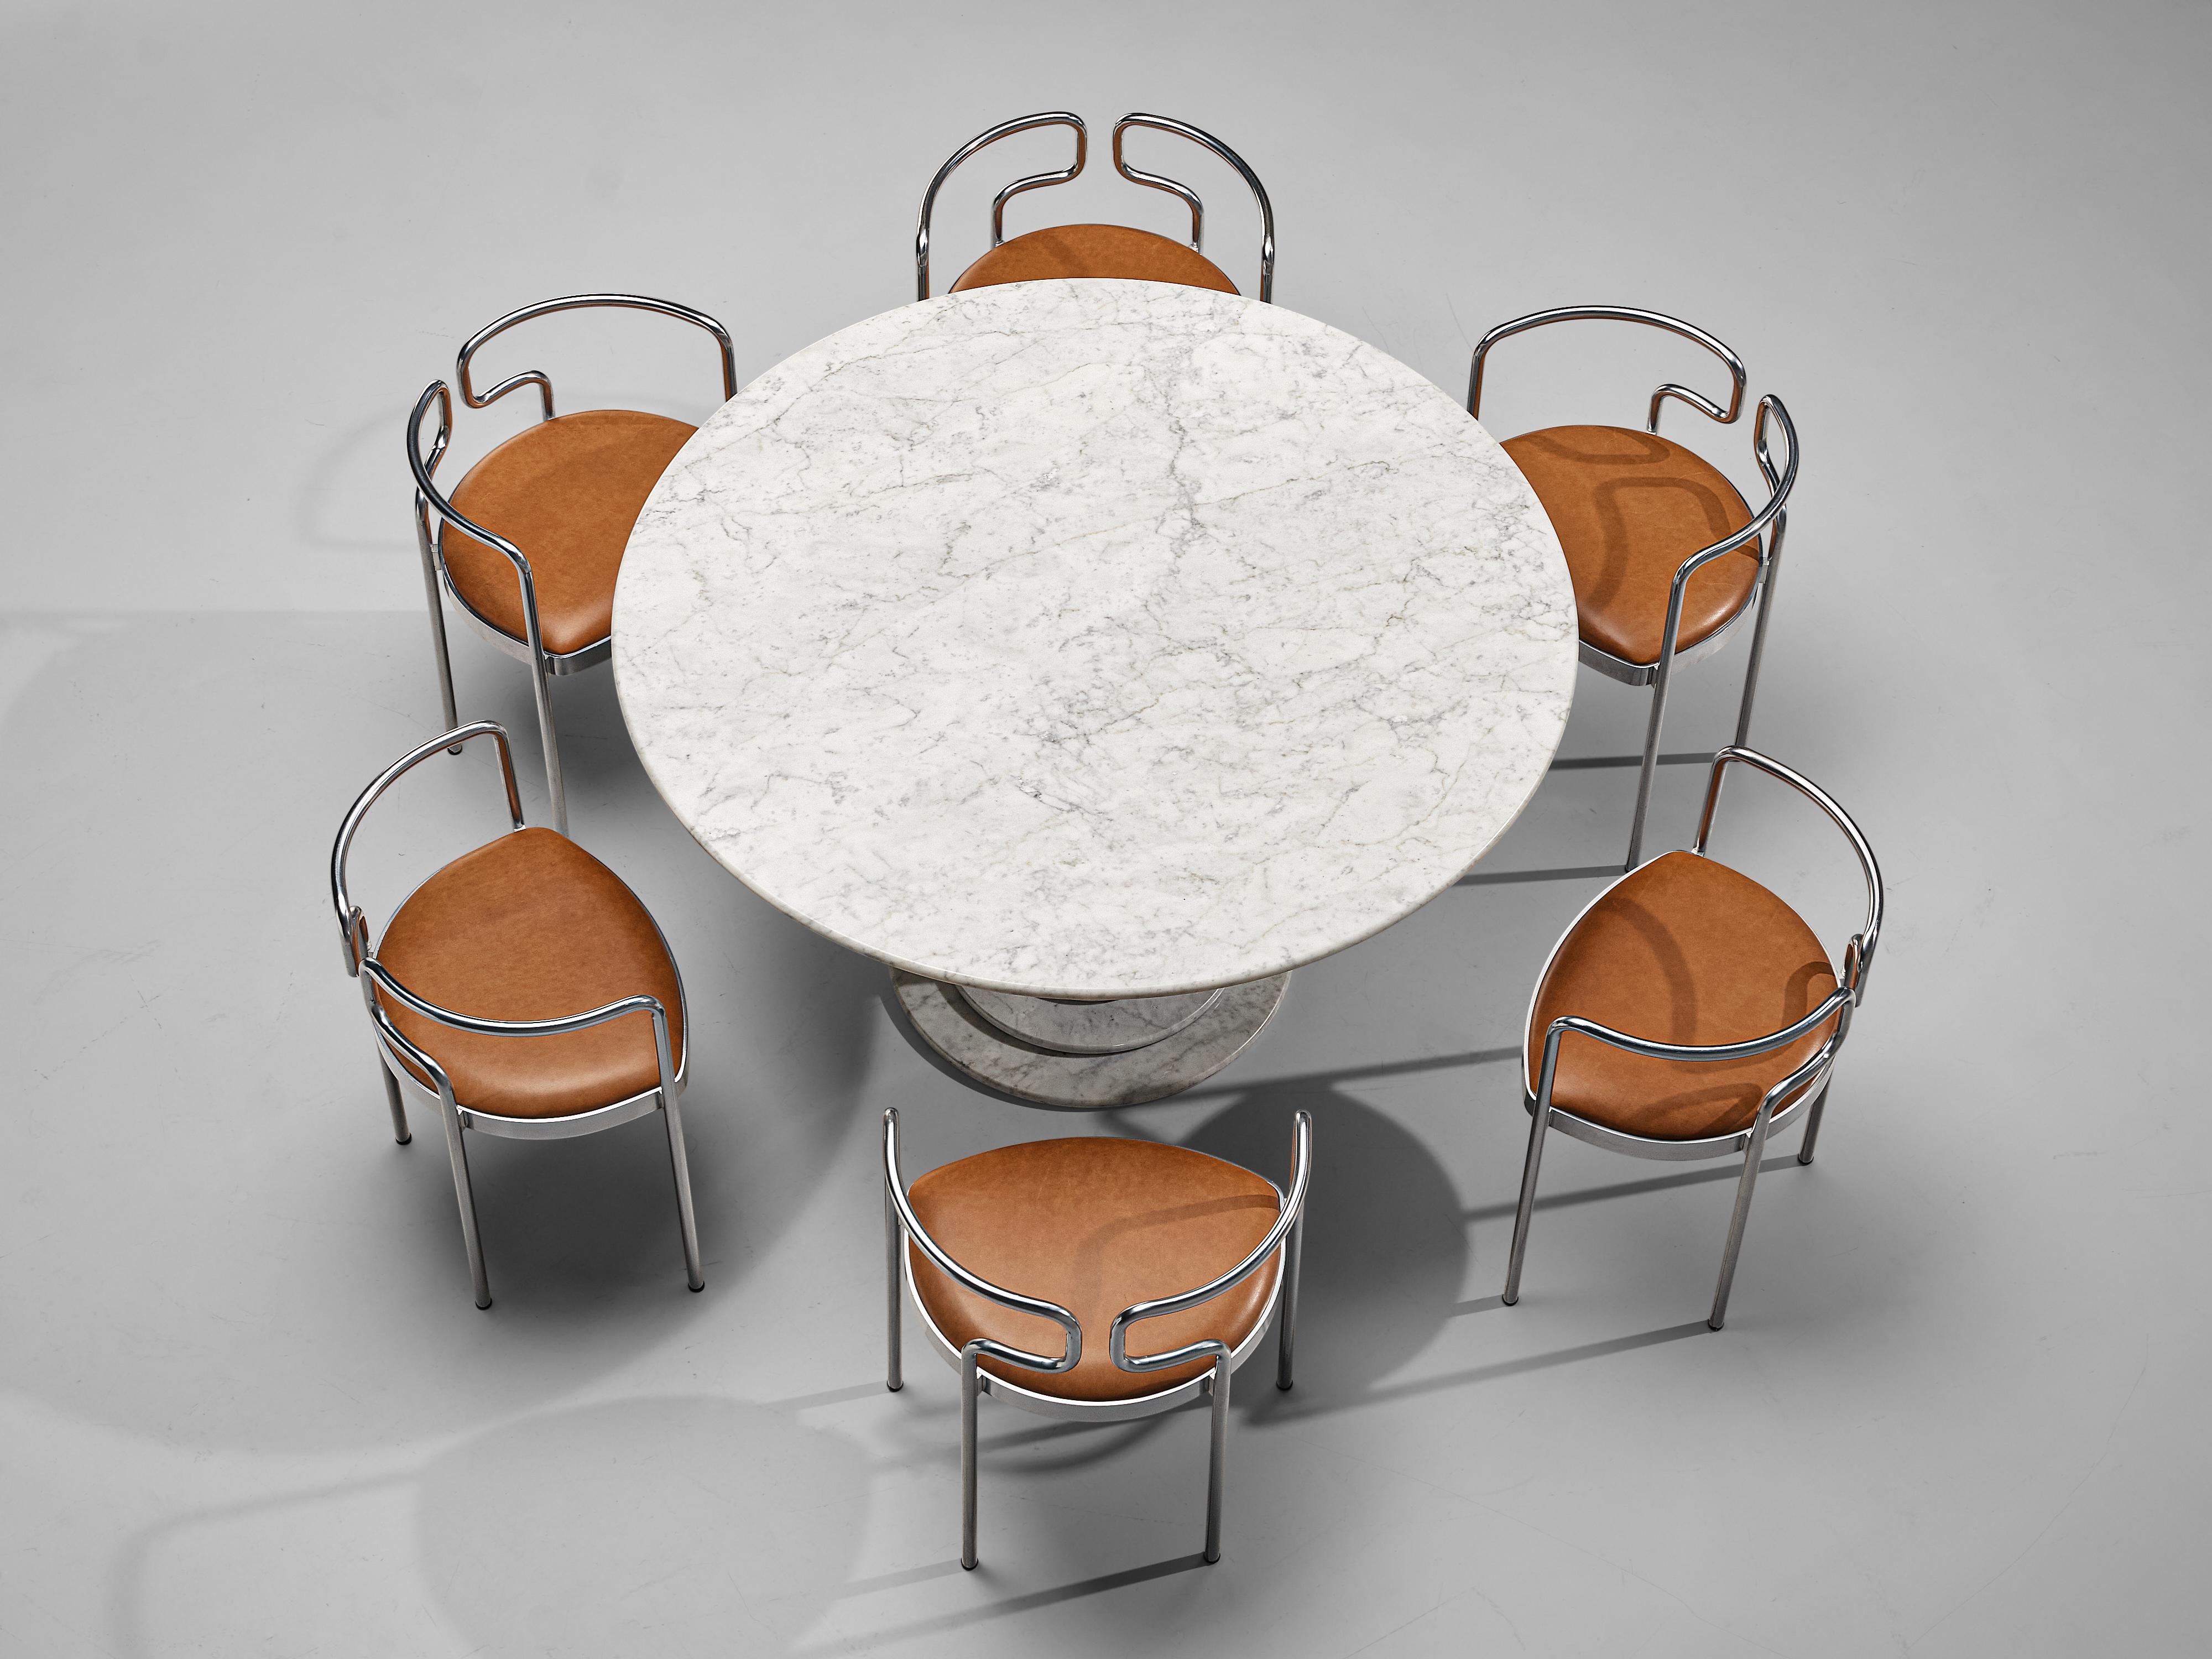 Marble Dining Table with Henning Larsen Dining Chairs 9230 in Cognac Leather 3